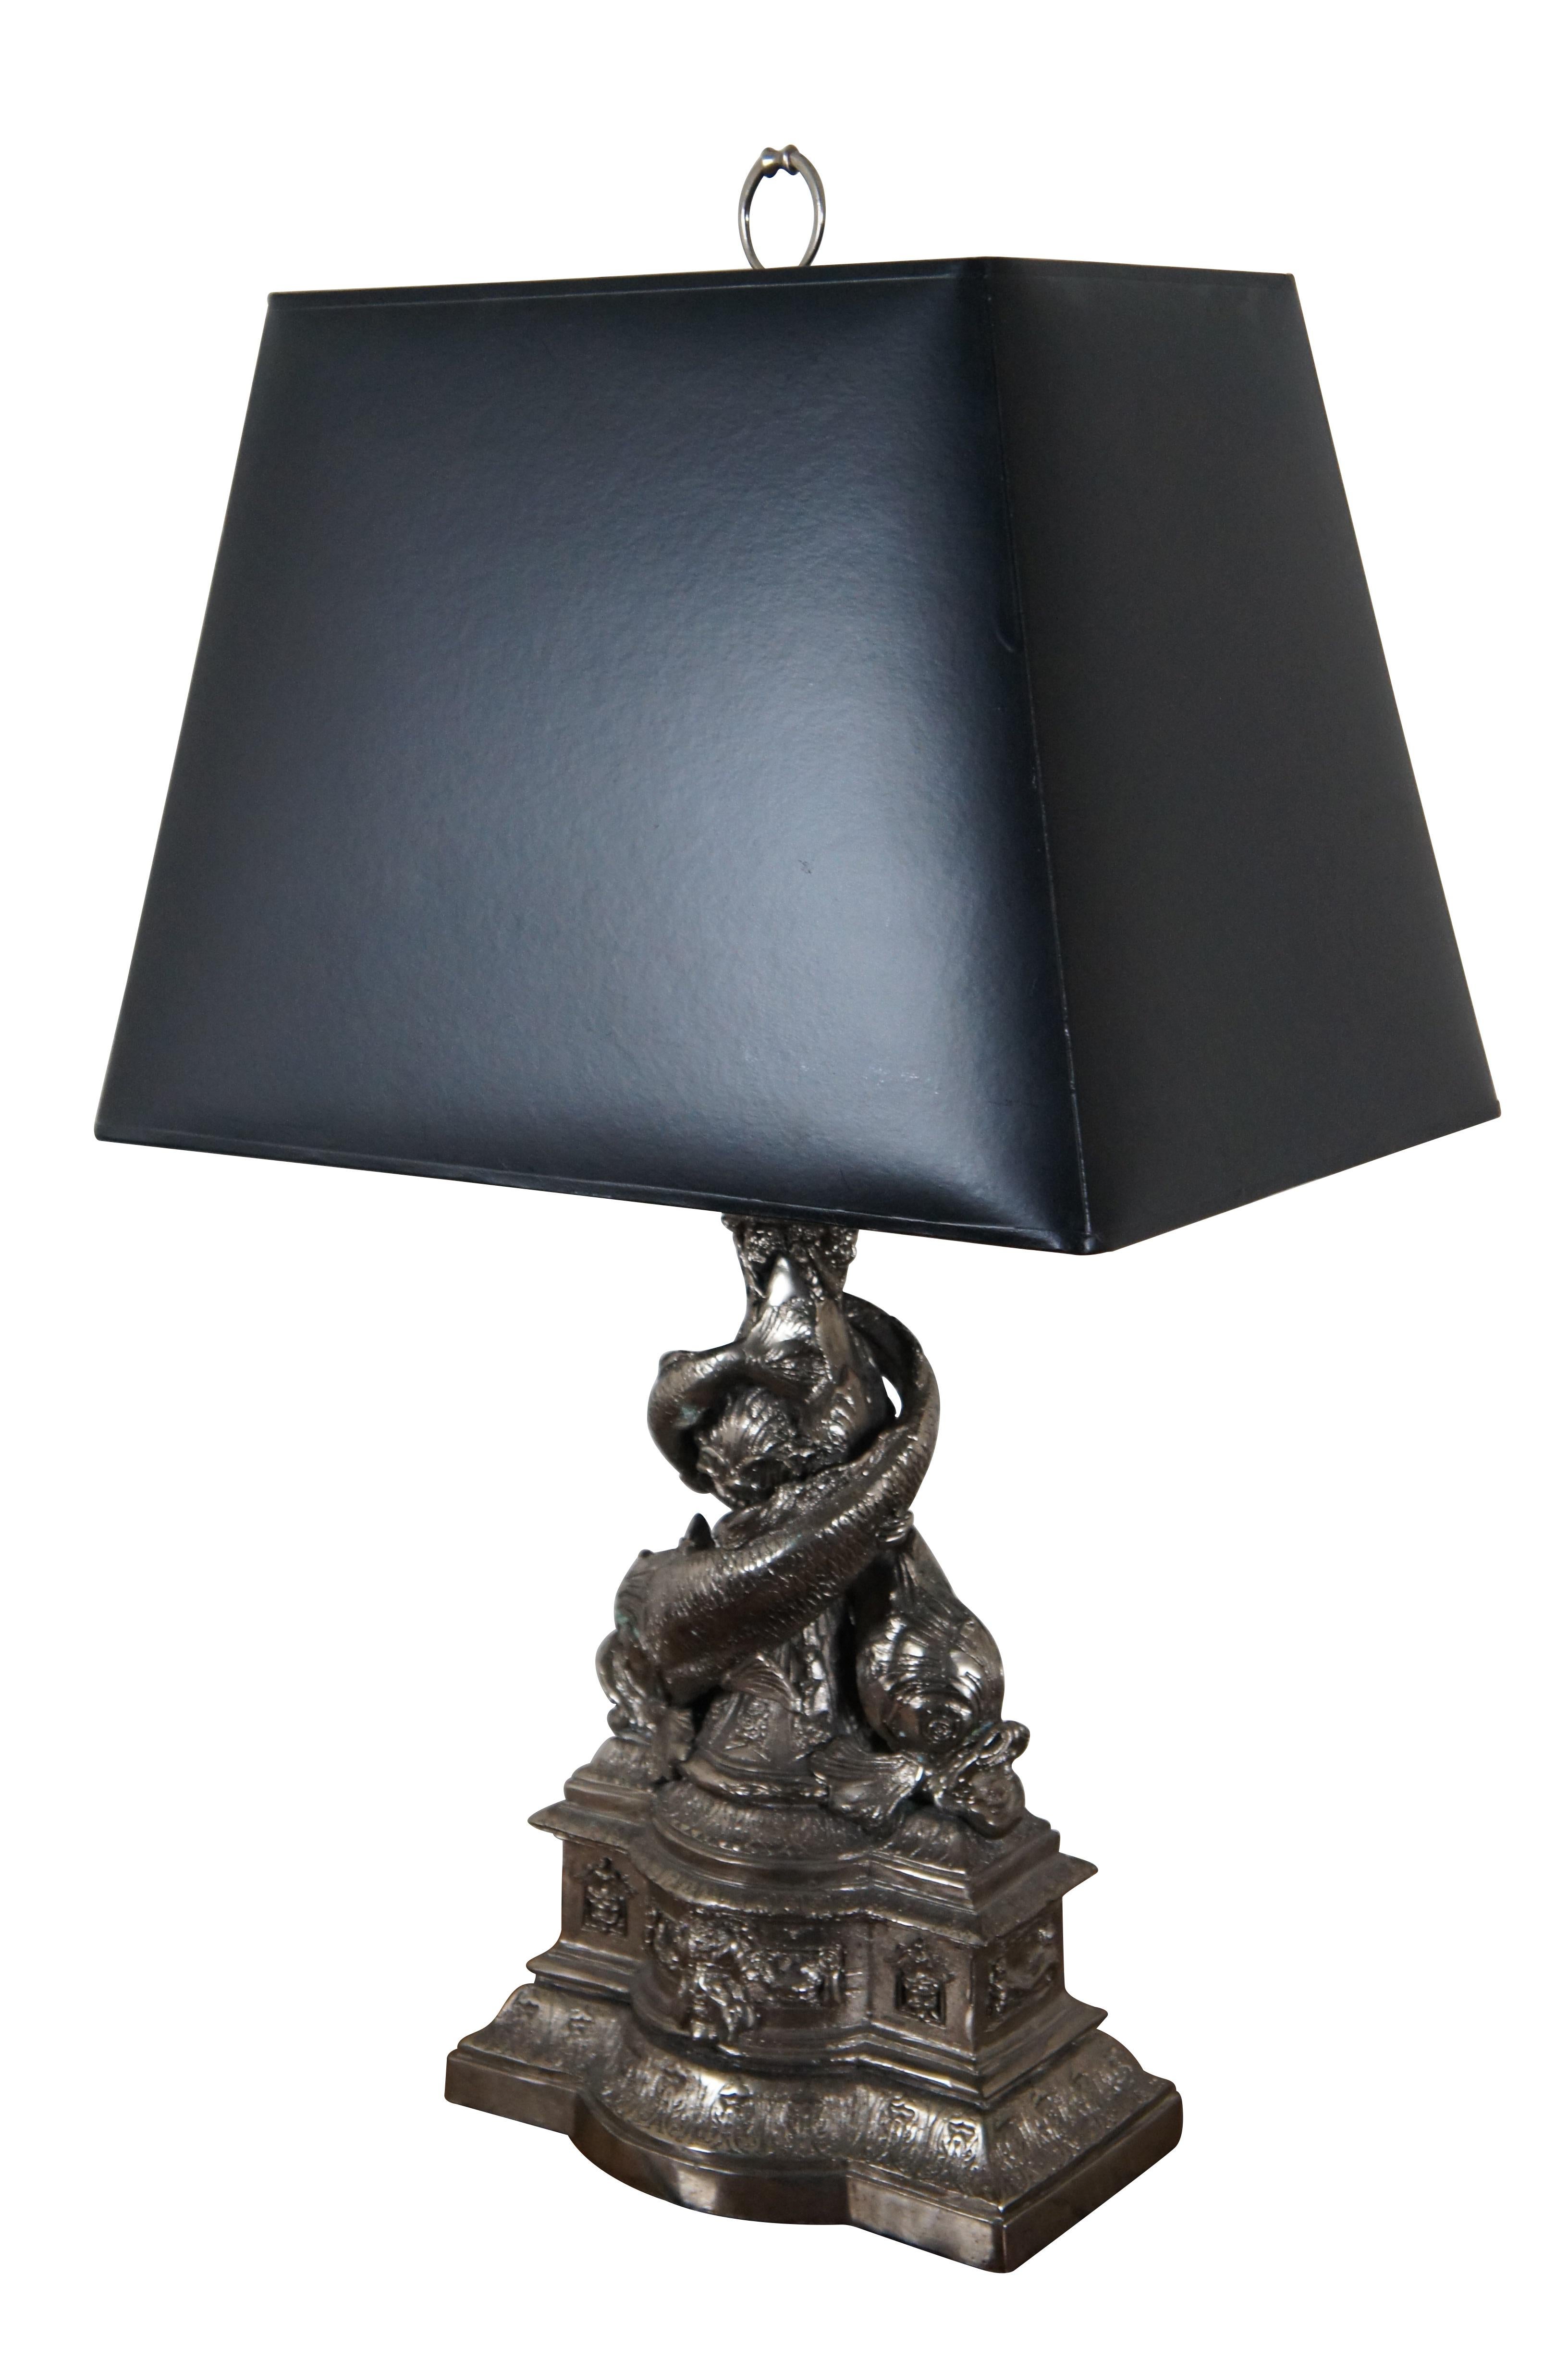 Rare vintage Maitland Smith table lamps, made of heavy cast metal with a bright silver finish, showing a Neoclassical style pedestal like the base of a fountain accented with the face of a bearded man with a cadeuceus at each corner, below a vase